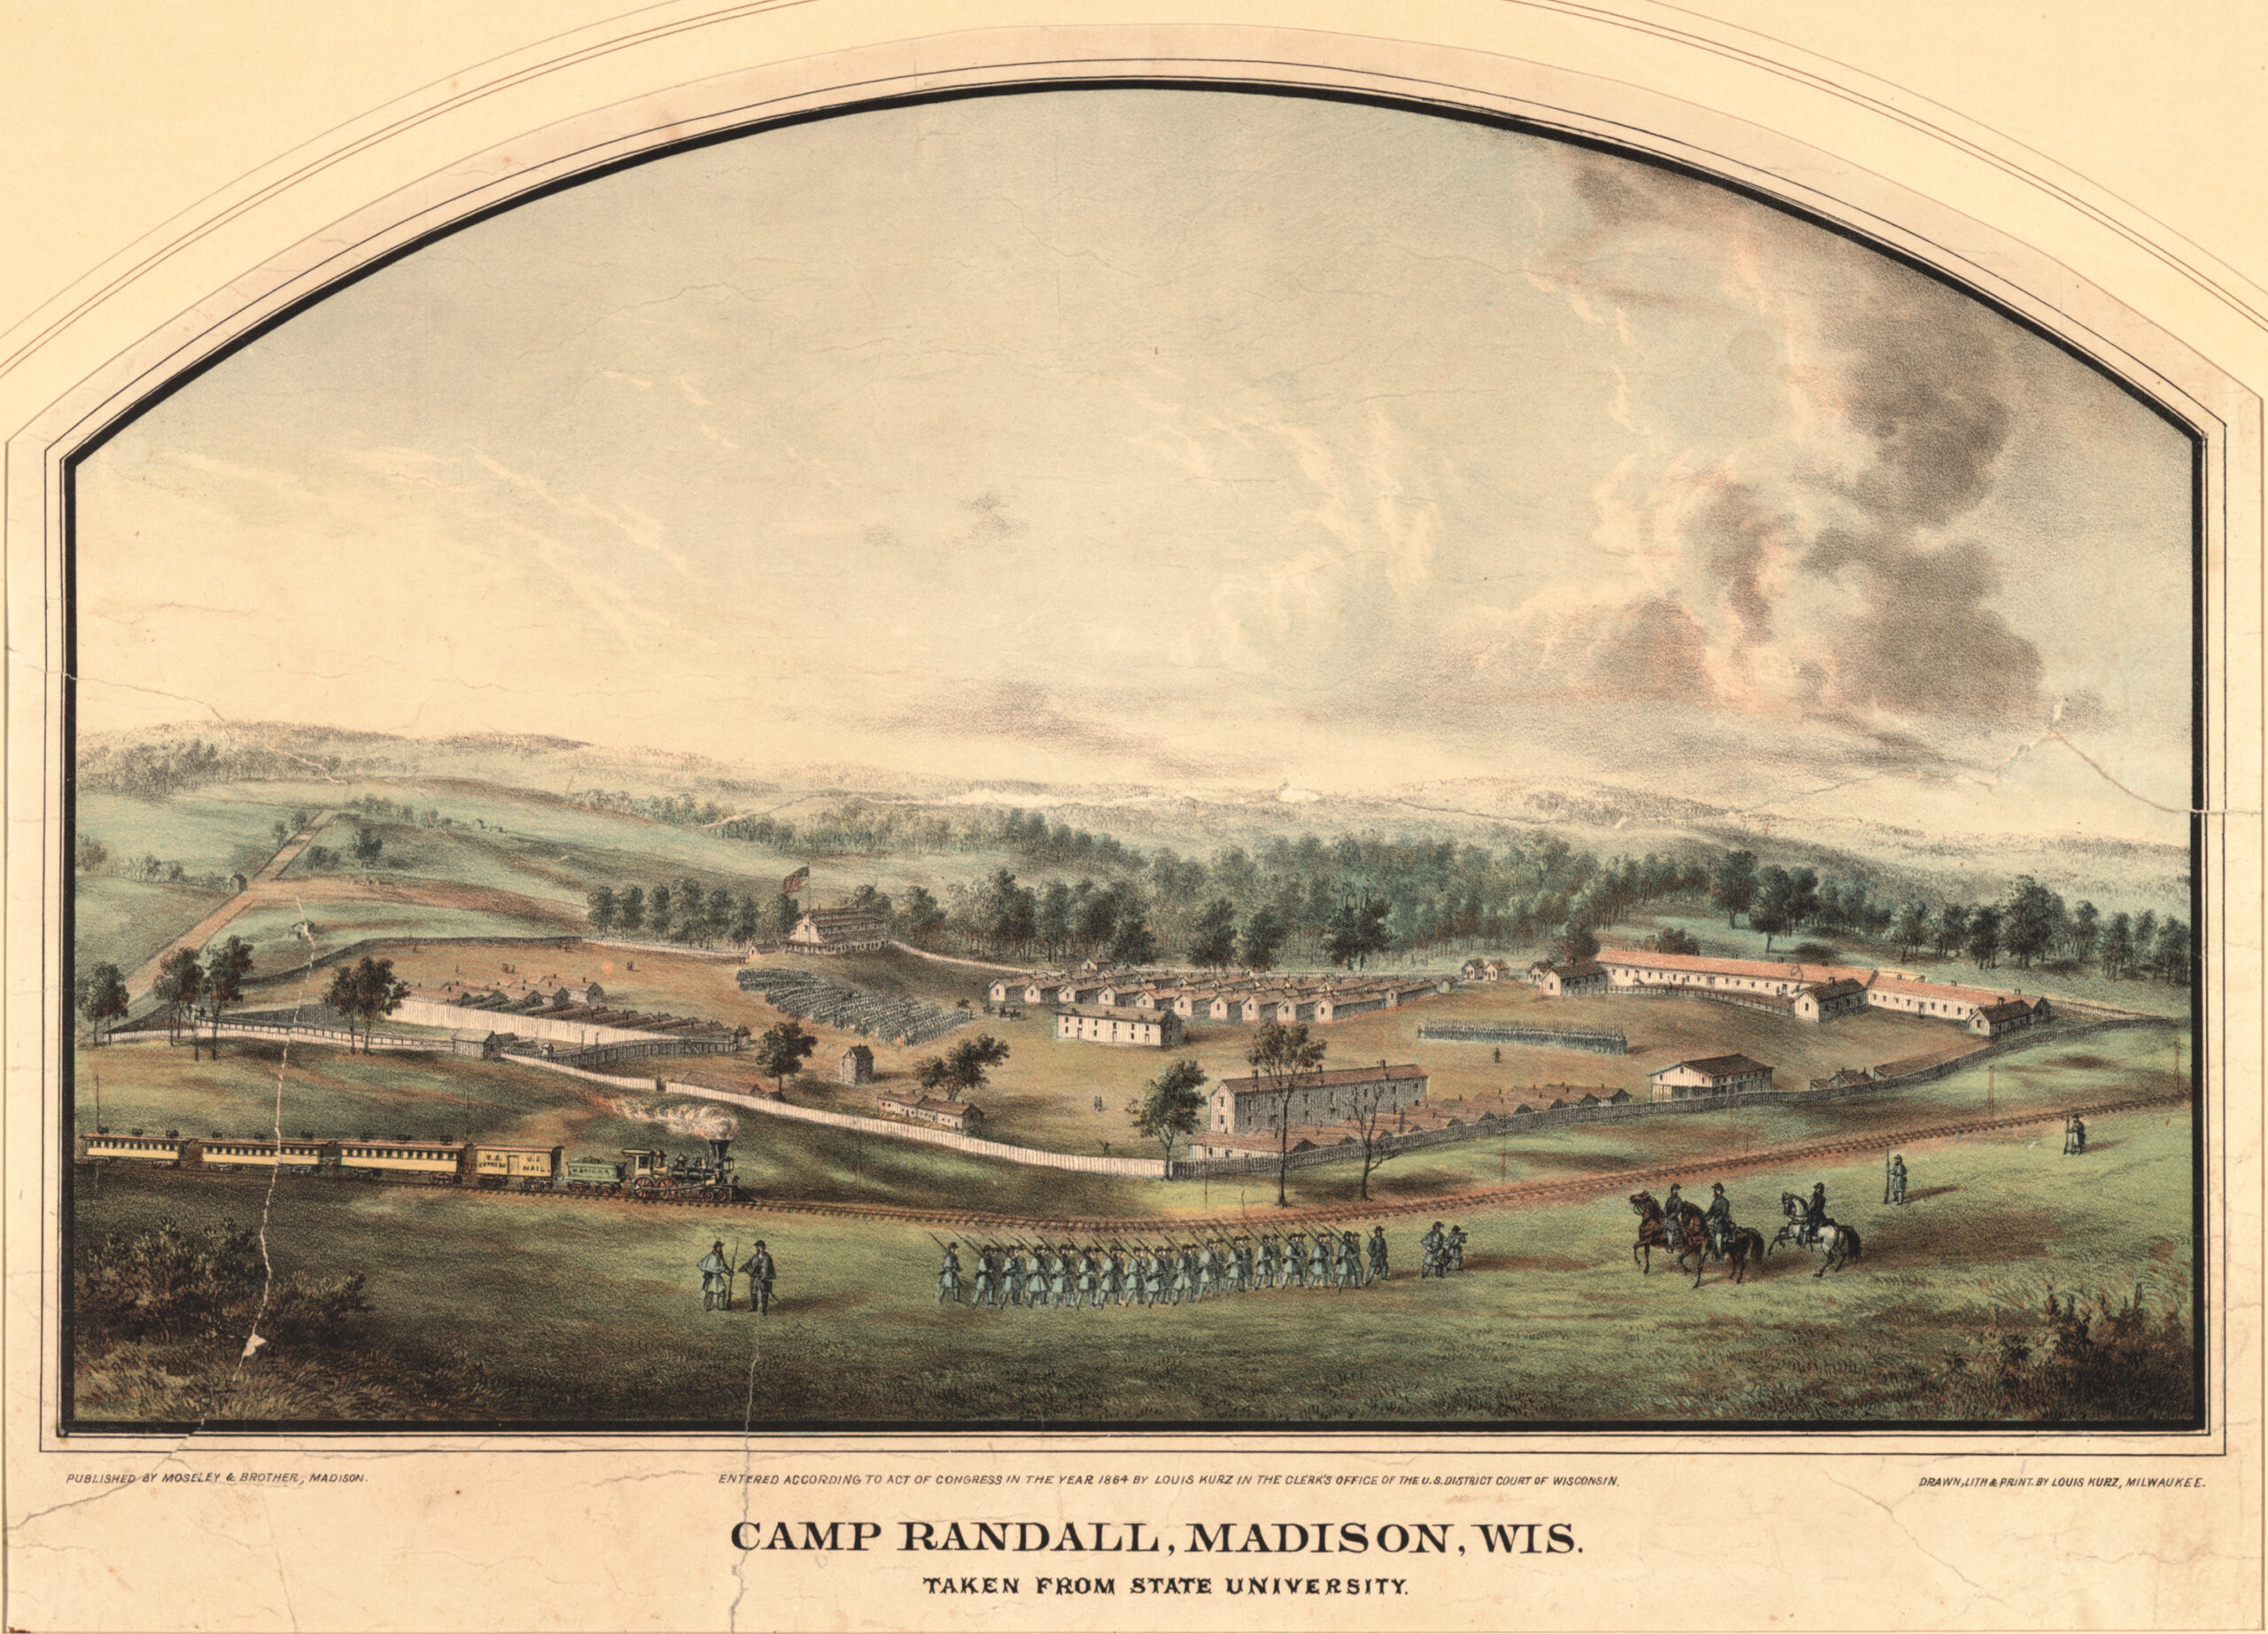 What Role Did Camp Randall Play In The Civil War?